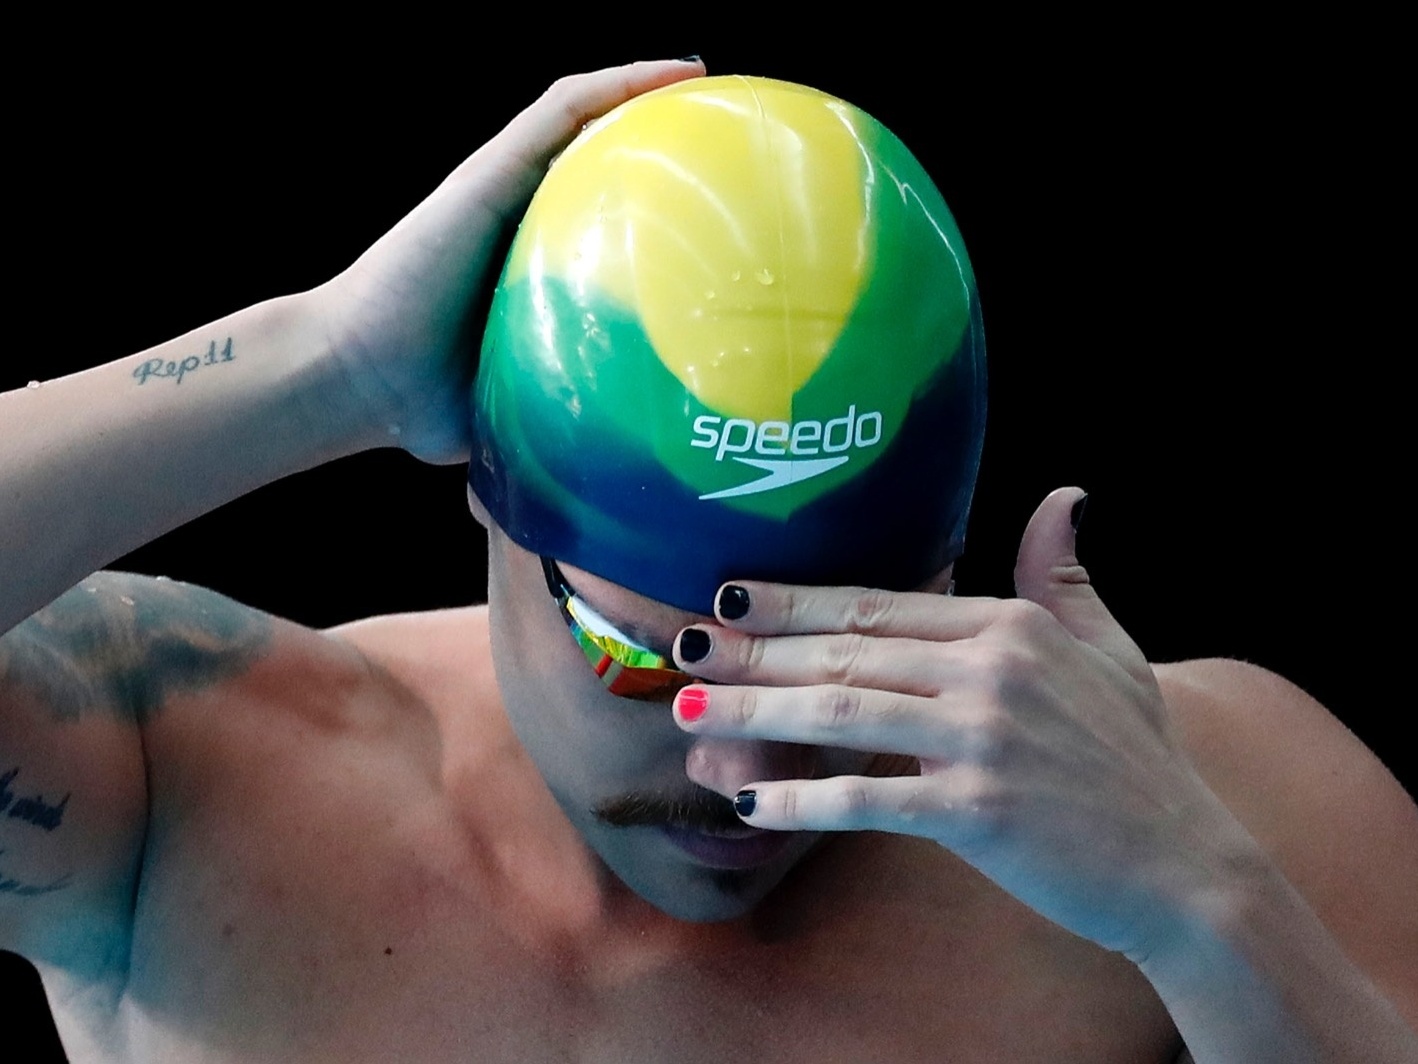 The Nails (and Medals) of a World Champion Brazilian swimmer